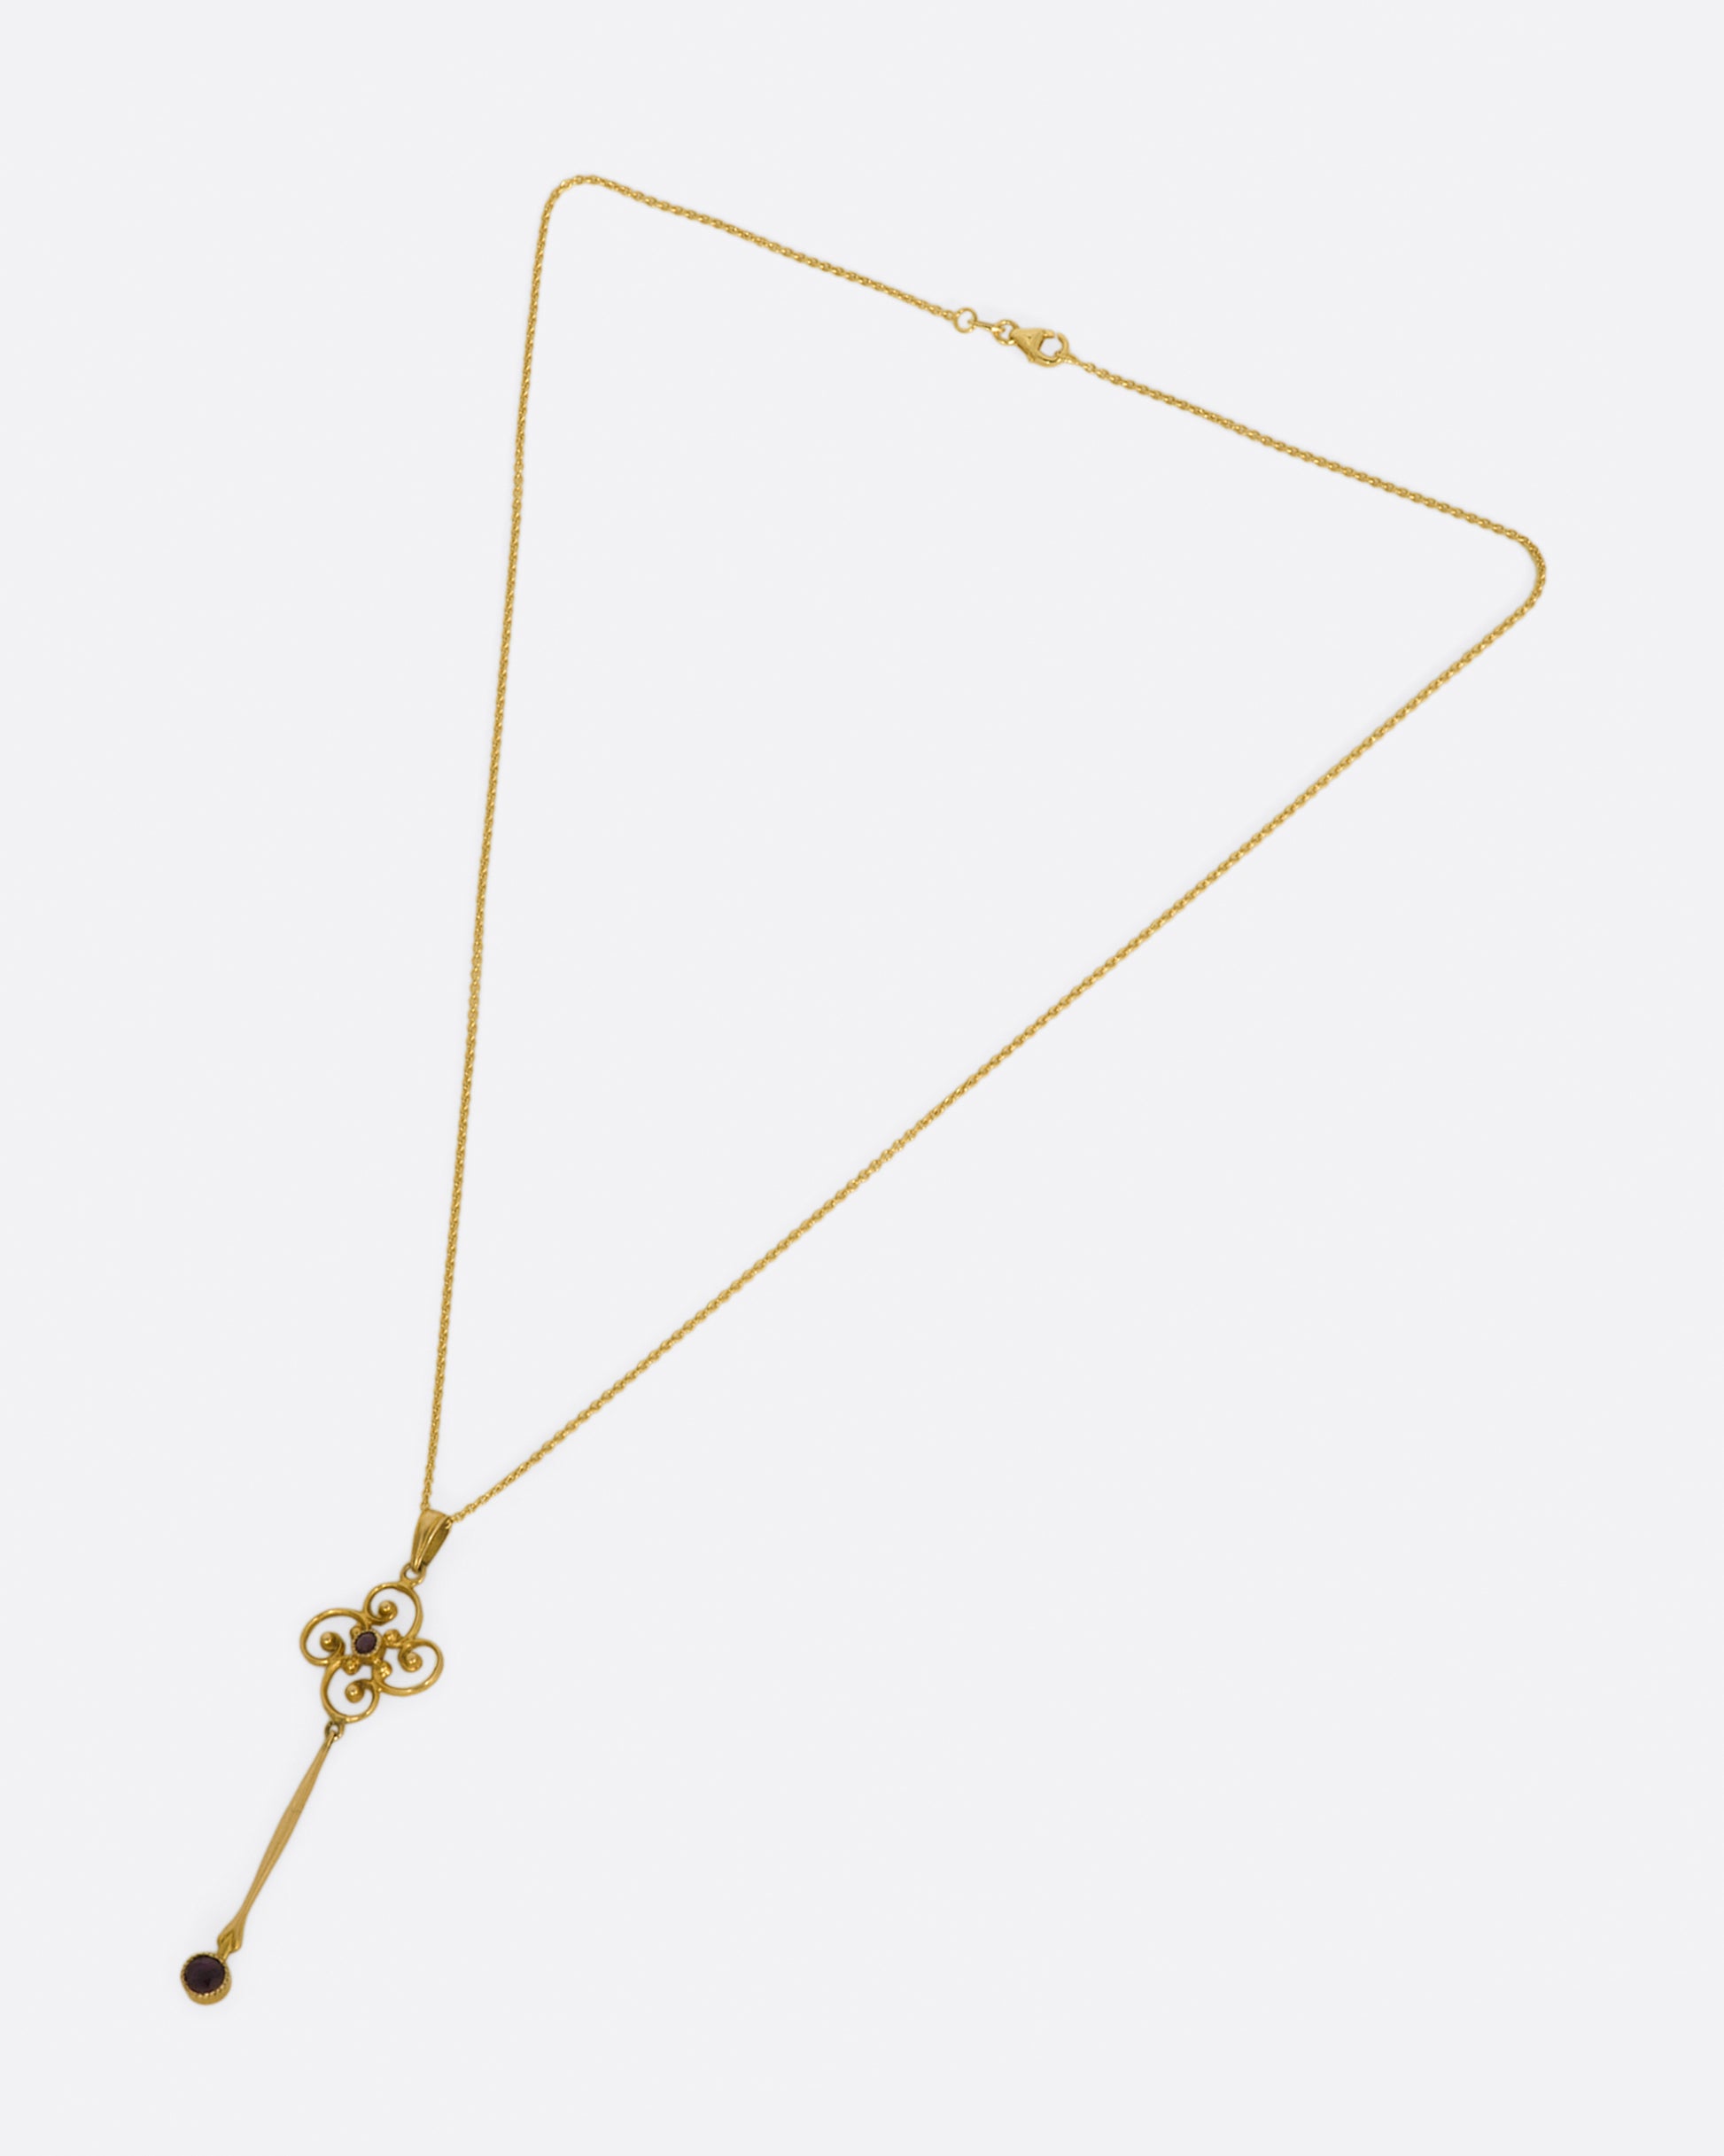 A contemporary yellow gold chain necklace with a vintage yellow gold pendant. The pendant has a flower-like design at the top with with a long bar hanging from it, and a round amethyst at the bottom.